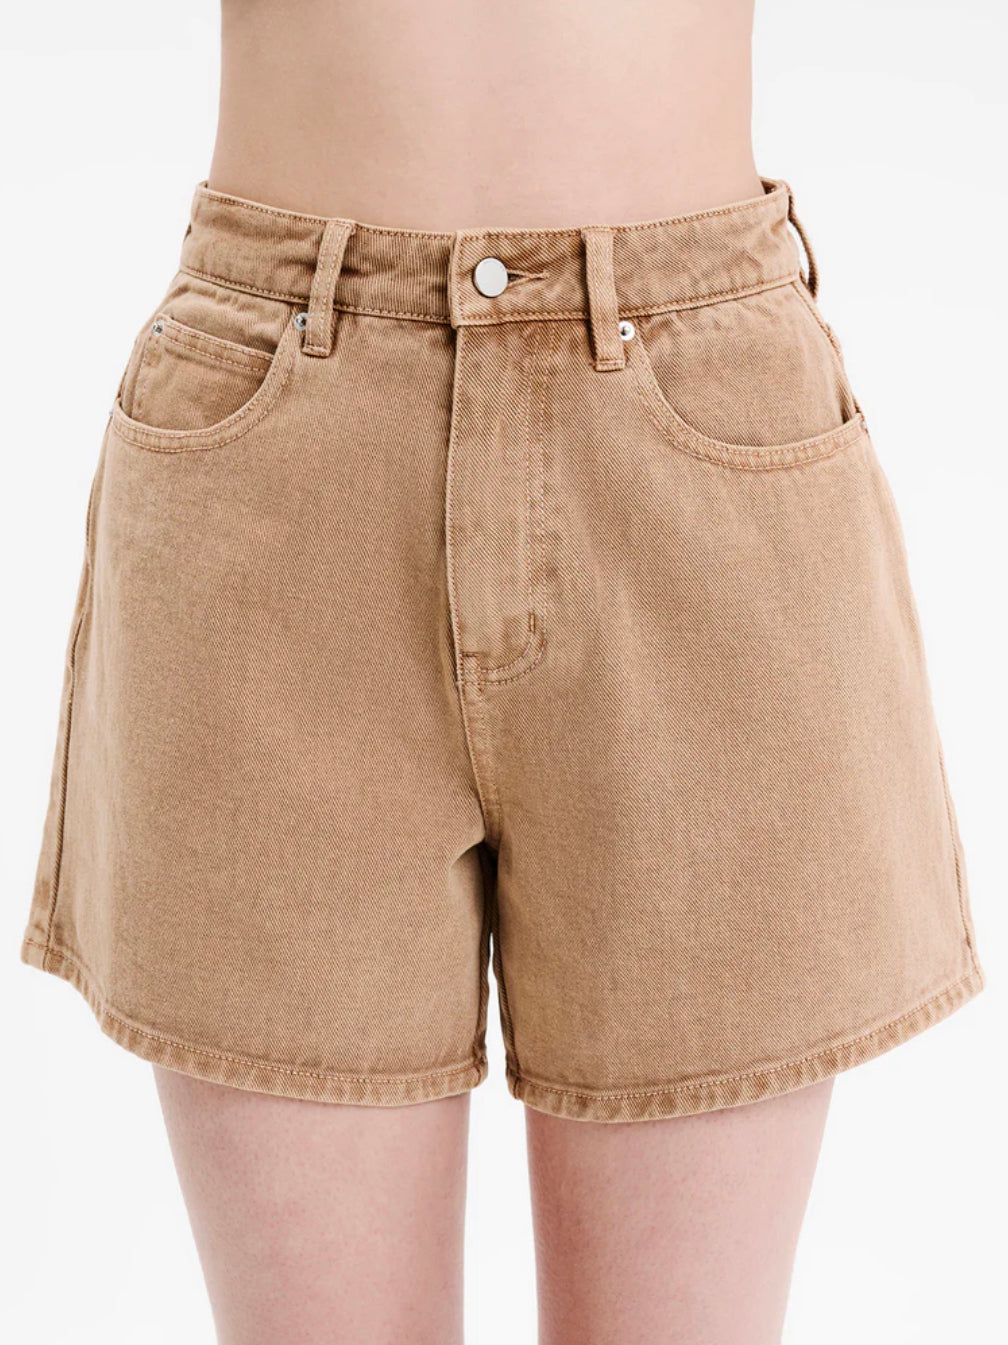 Nude Lucy The Blaise Short - Sesame